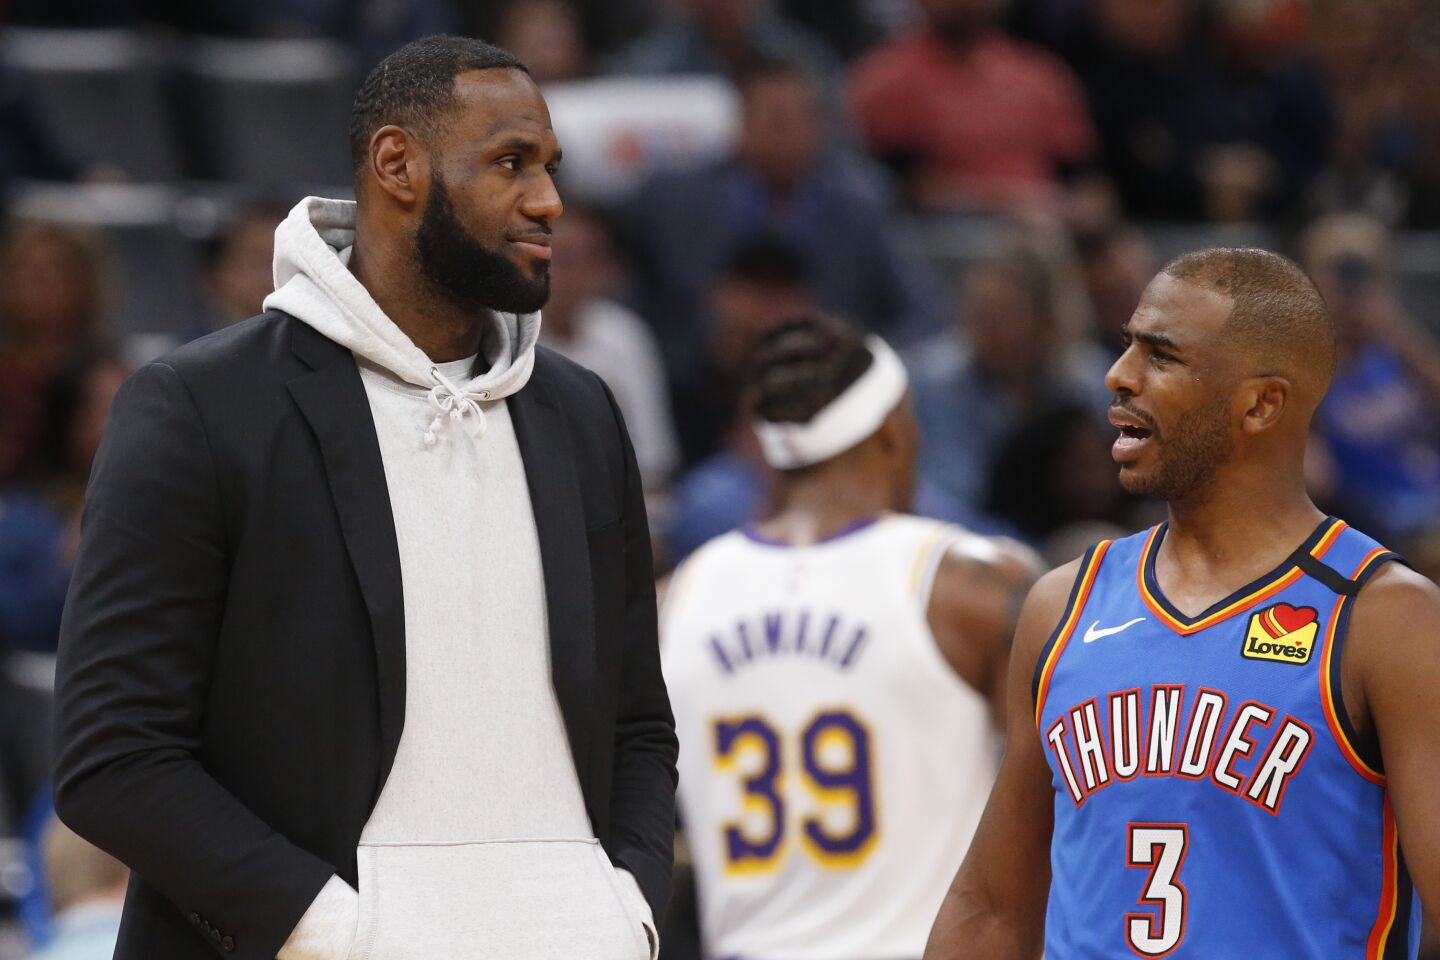 LeBron James and Chris Paul talk during a timeout in the second half of a game Jan. 11 at Chesapeake Energy Arena.